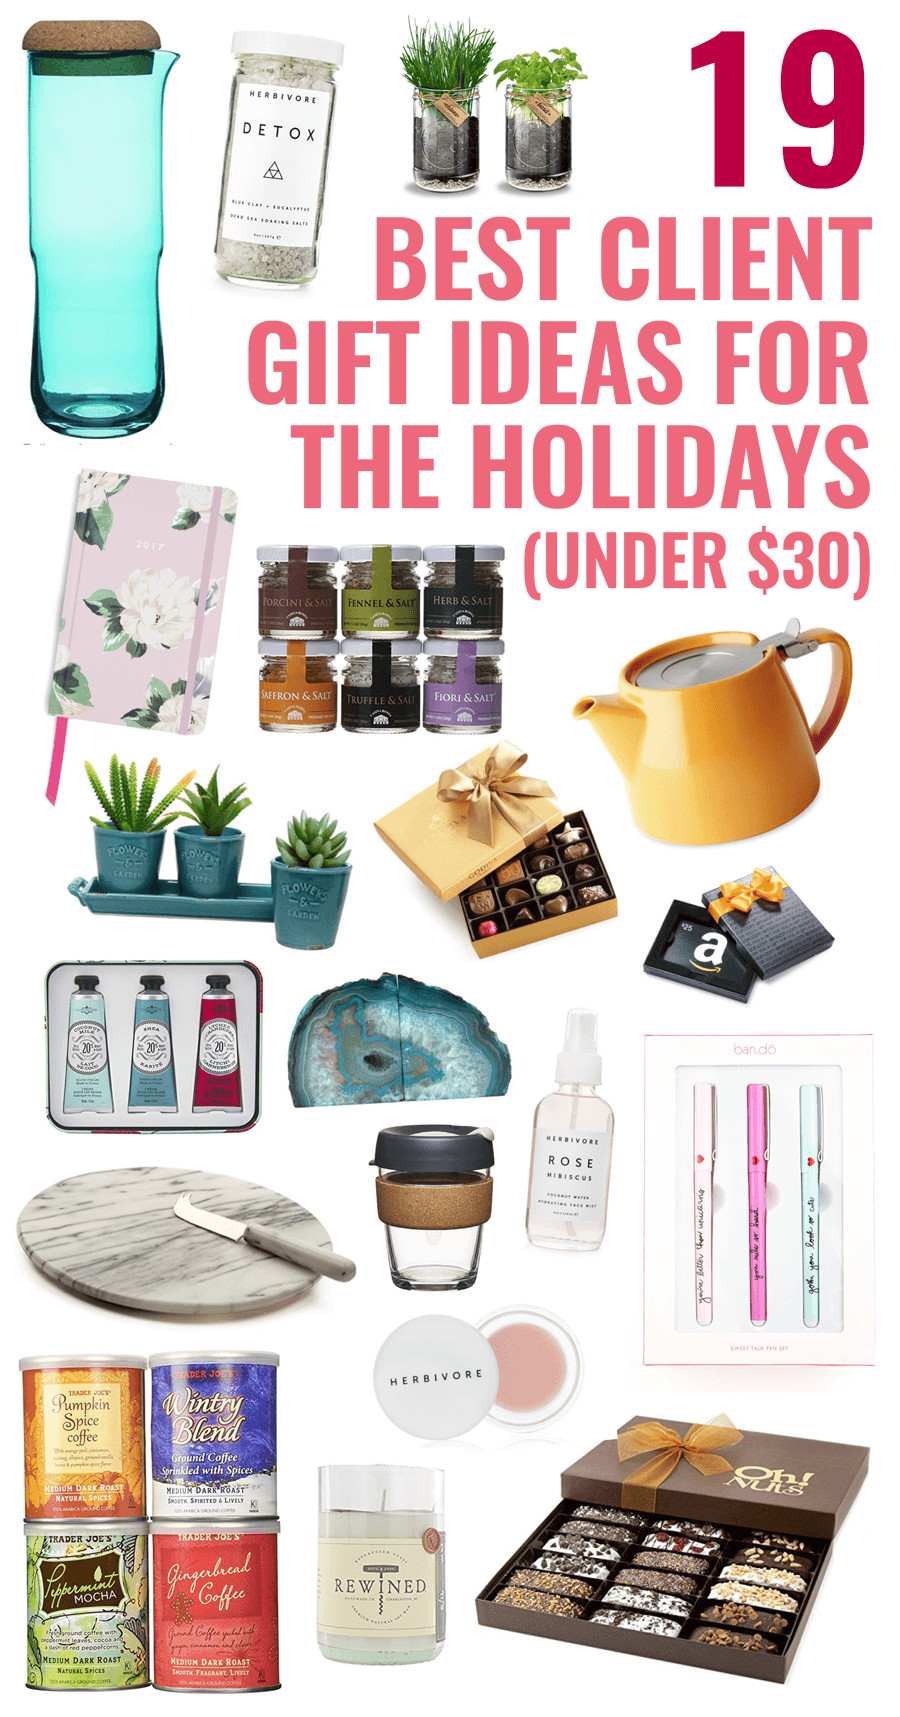 Client Holiday Gift Ideas
 19 Best Client Gift Ideas for the Holidays under $30